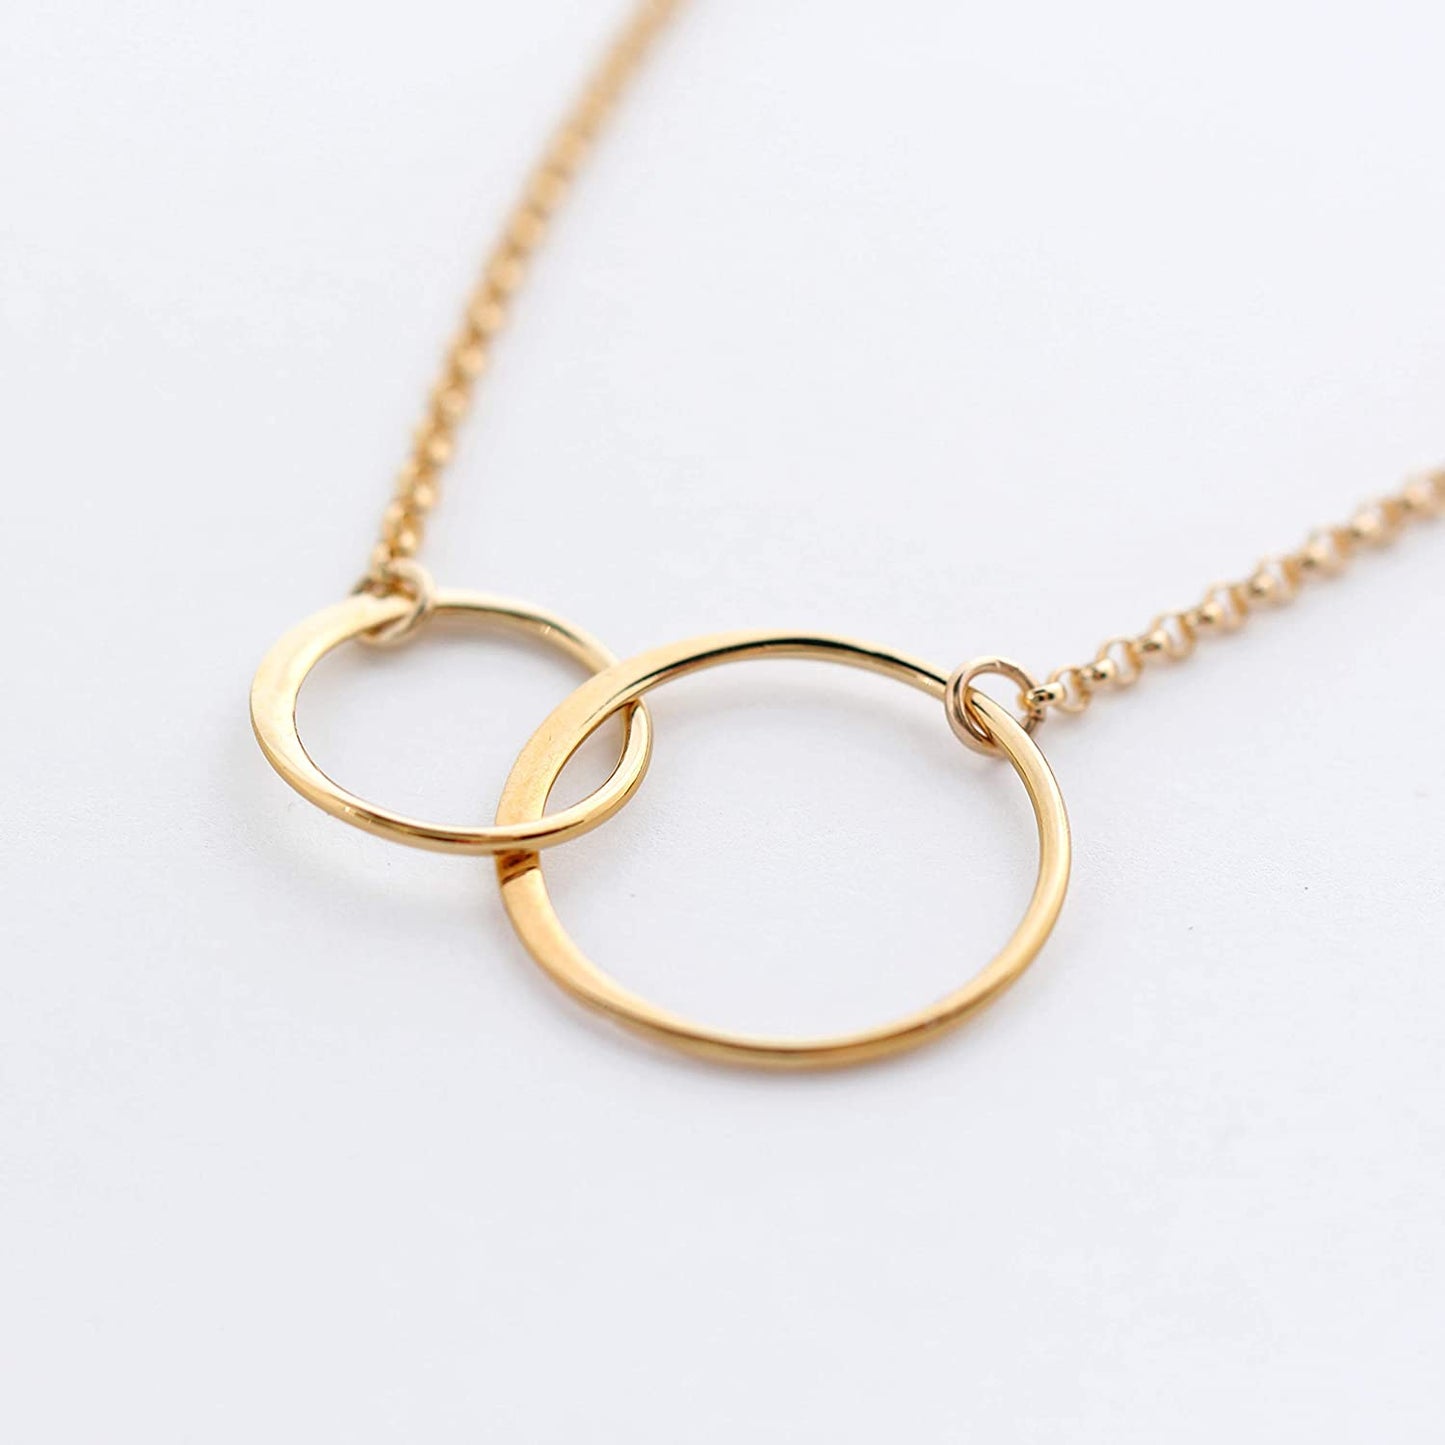 Daughter Gifts • Gift for Daughter from Mom Dad • 14k Gold • Connected Eternity Circle Necklace • Women Girls • Unique Thoughtful Birthday Gifts for Daughter • Stepdaughter • Adopted Daughter Gifts